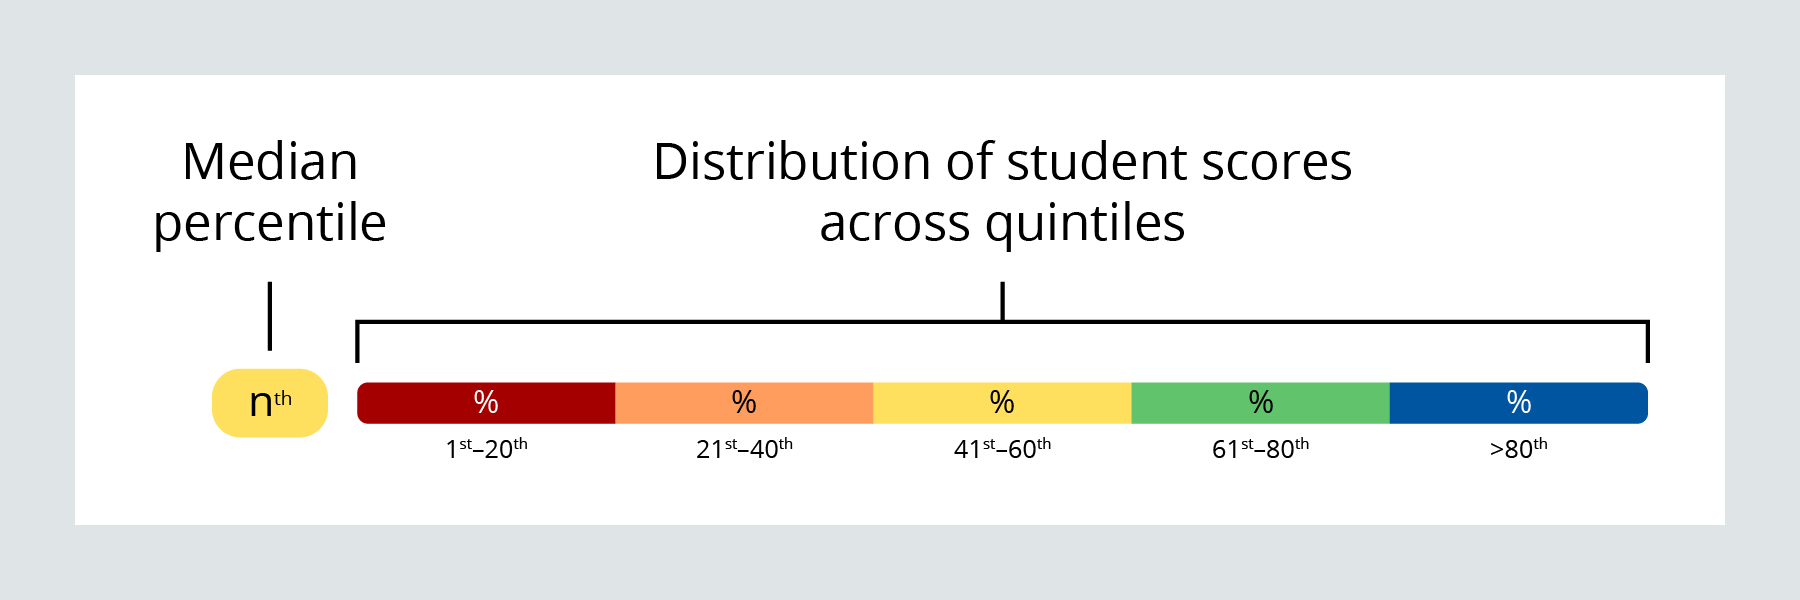 The median percentile is represented first, followed by the distribution of student scores across quintiles.